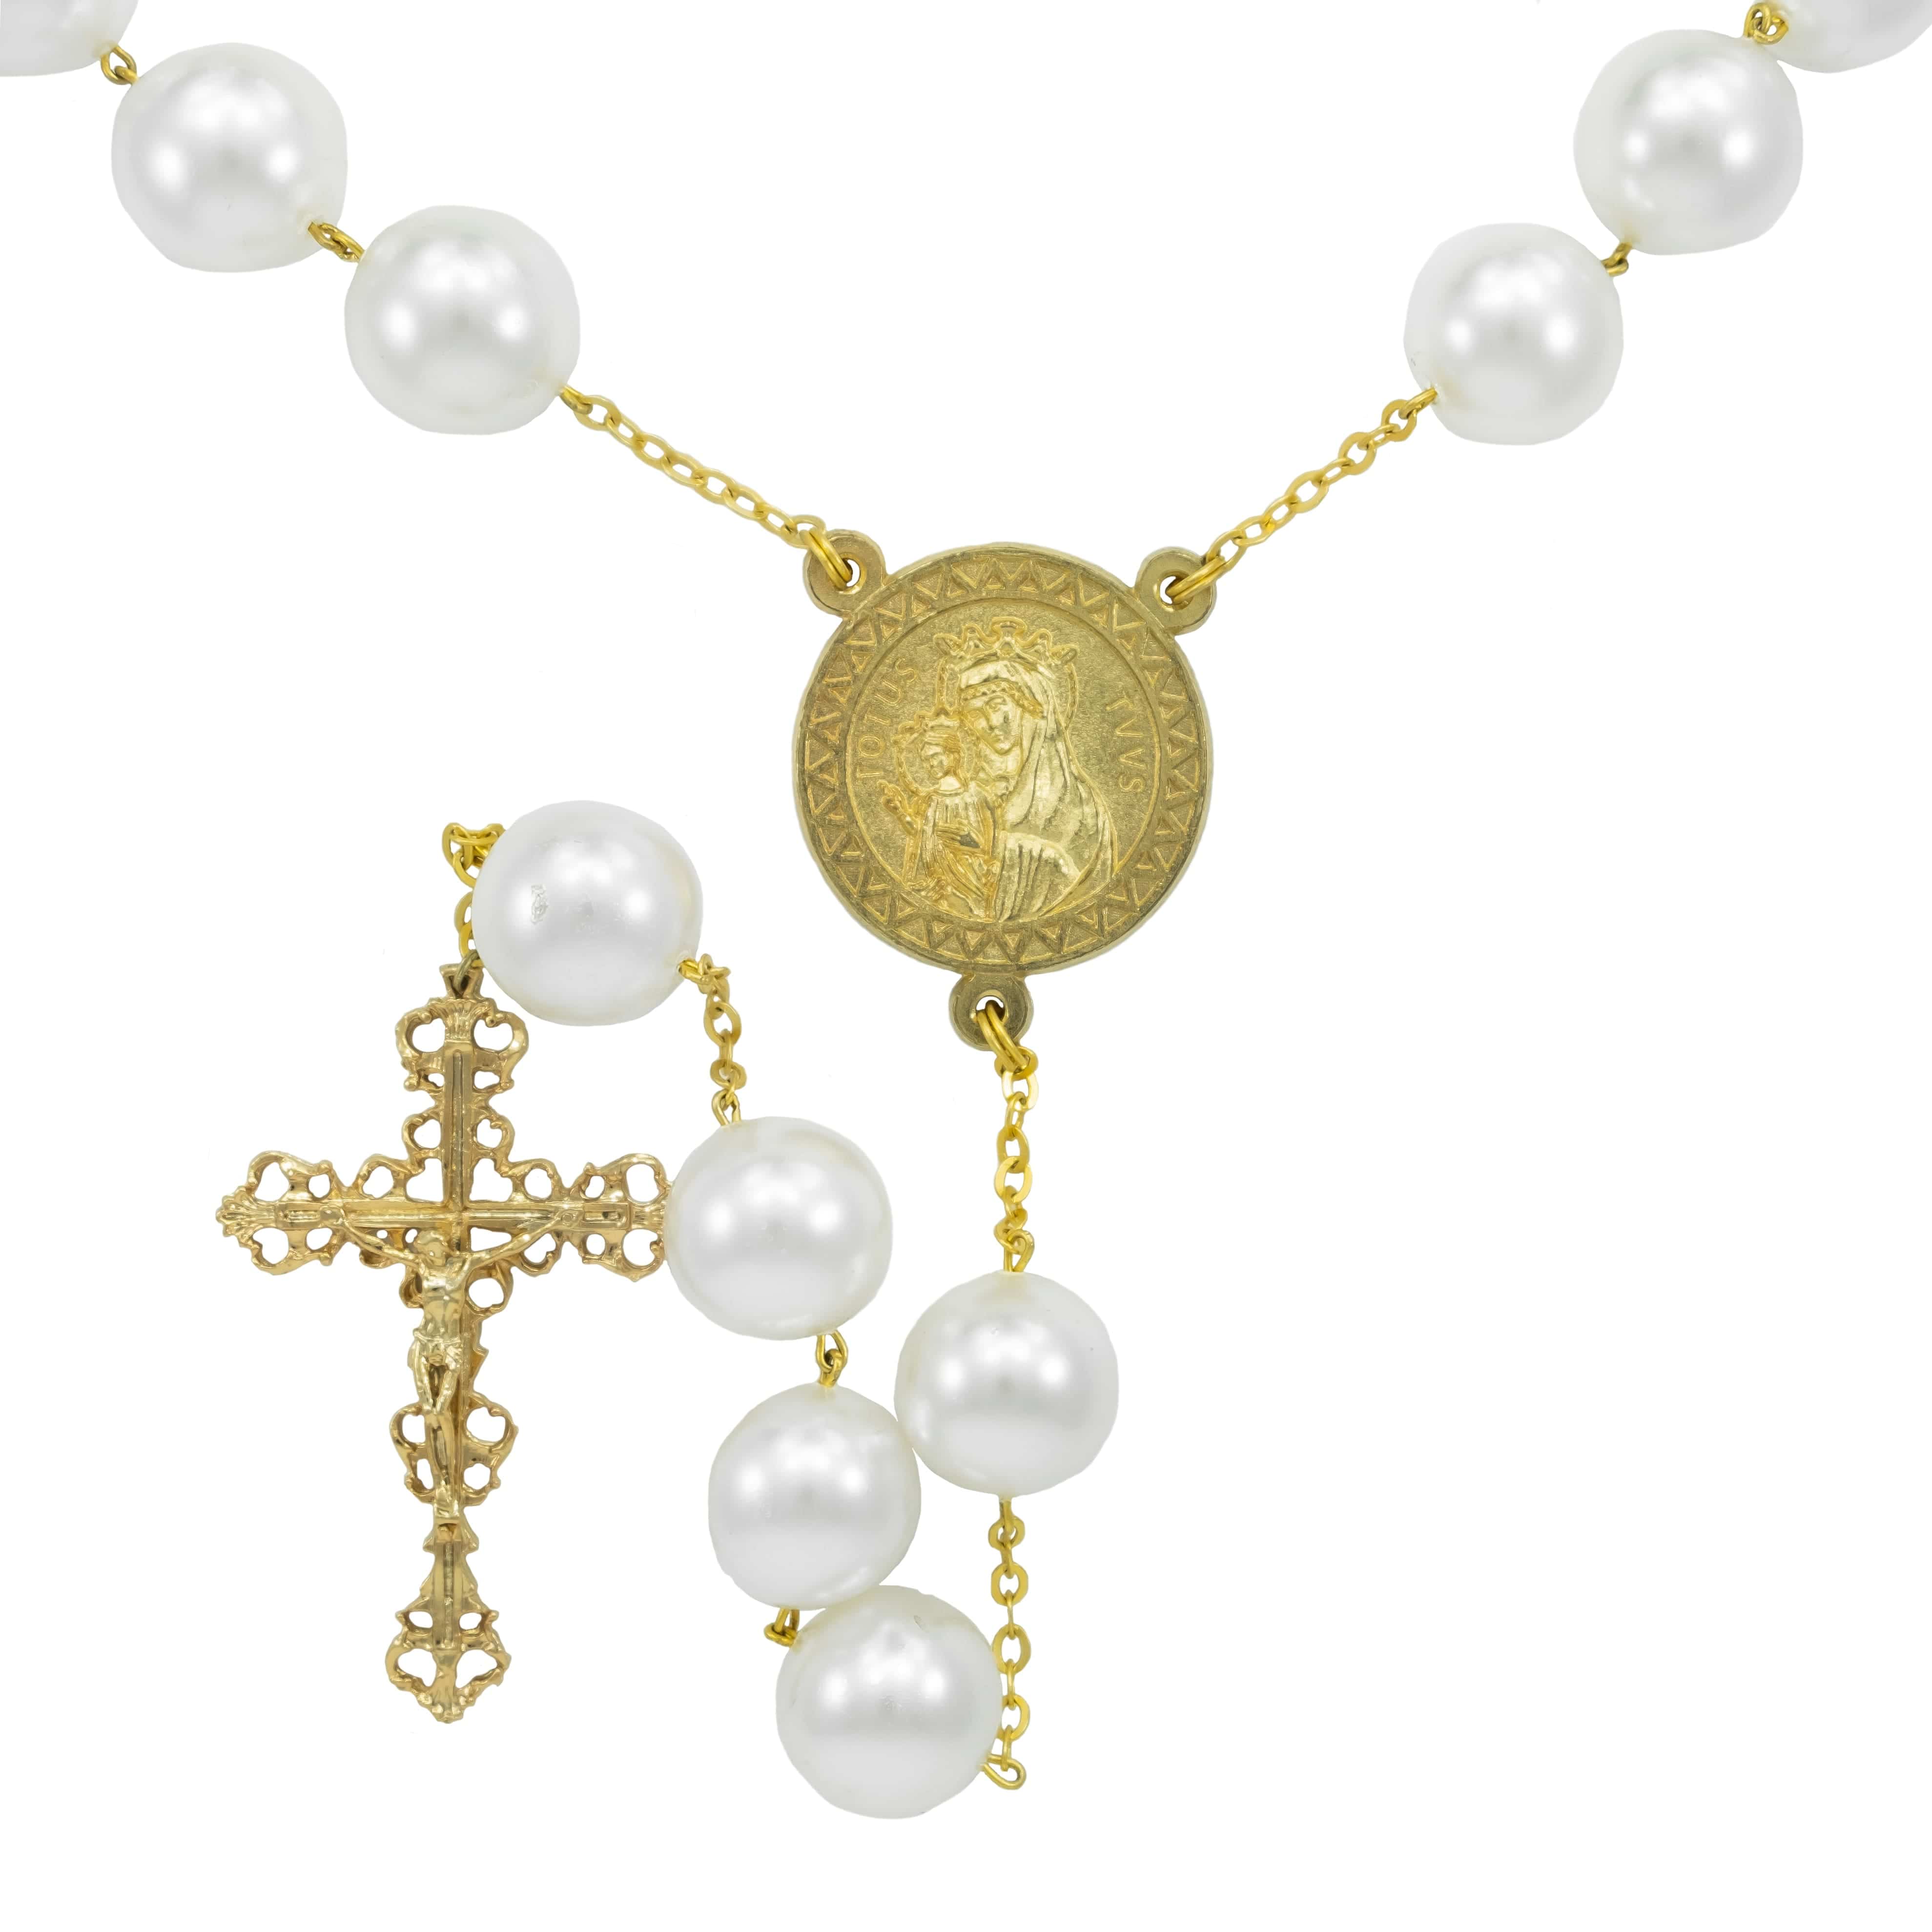 Victoria Handmade Pearl Necklace Imitation White Crystal Beads Pearl Rosary  Style Long Necklace Adjustable Gothic Cross